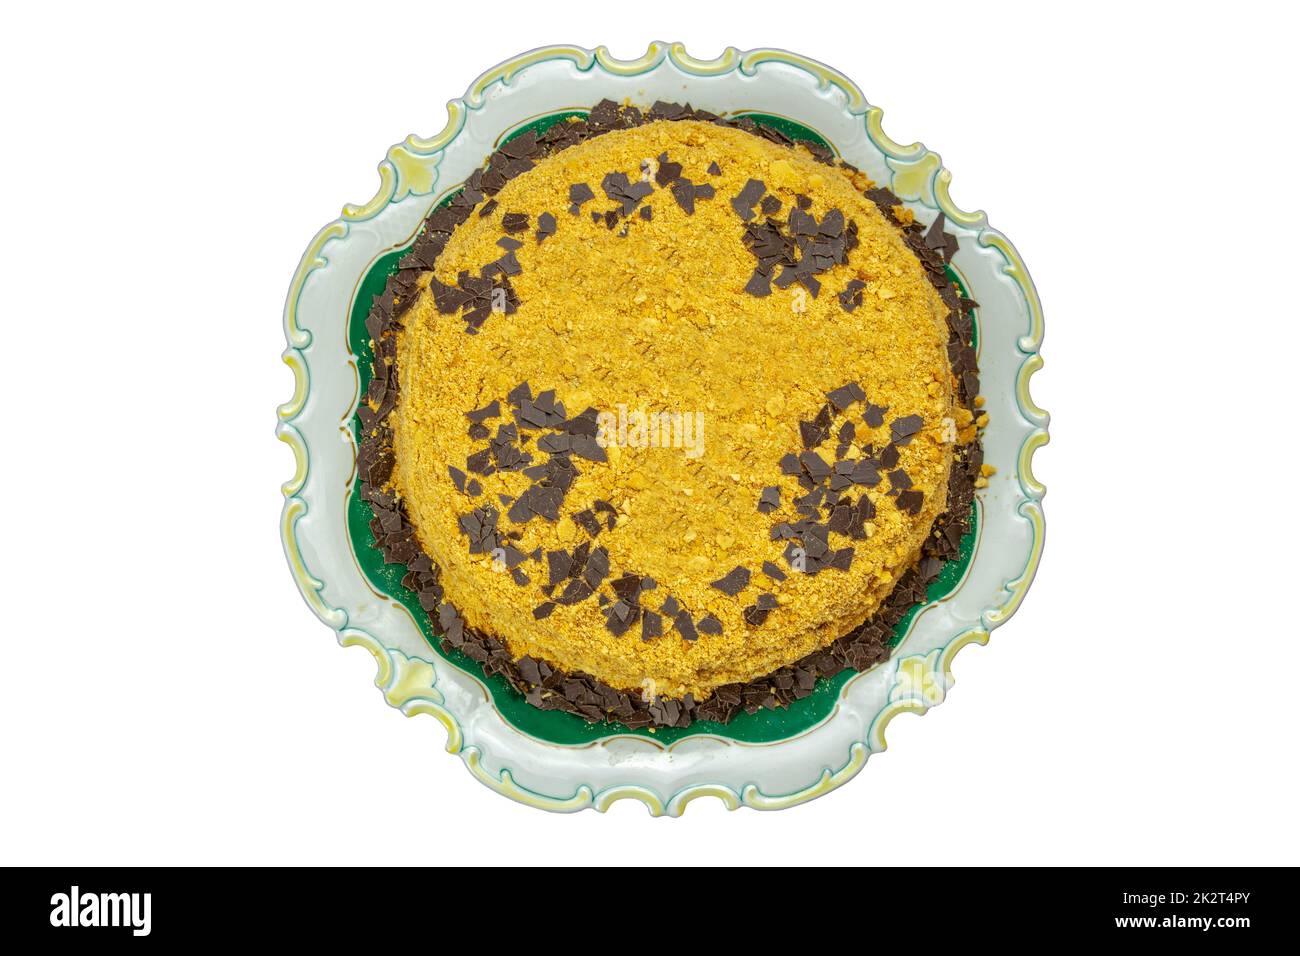 Top view of homemade lemon cake with almonds and chocolate flakes with space for your design. Birthday, wedding, anniversary or other festivals. Clipping path. Stock Photo